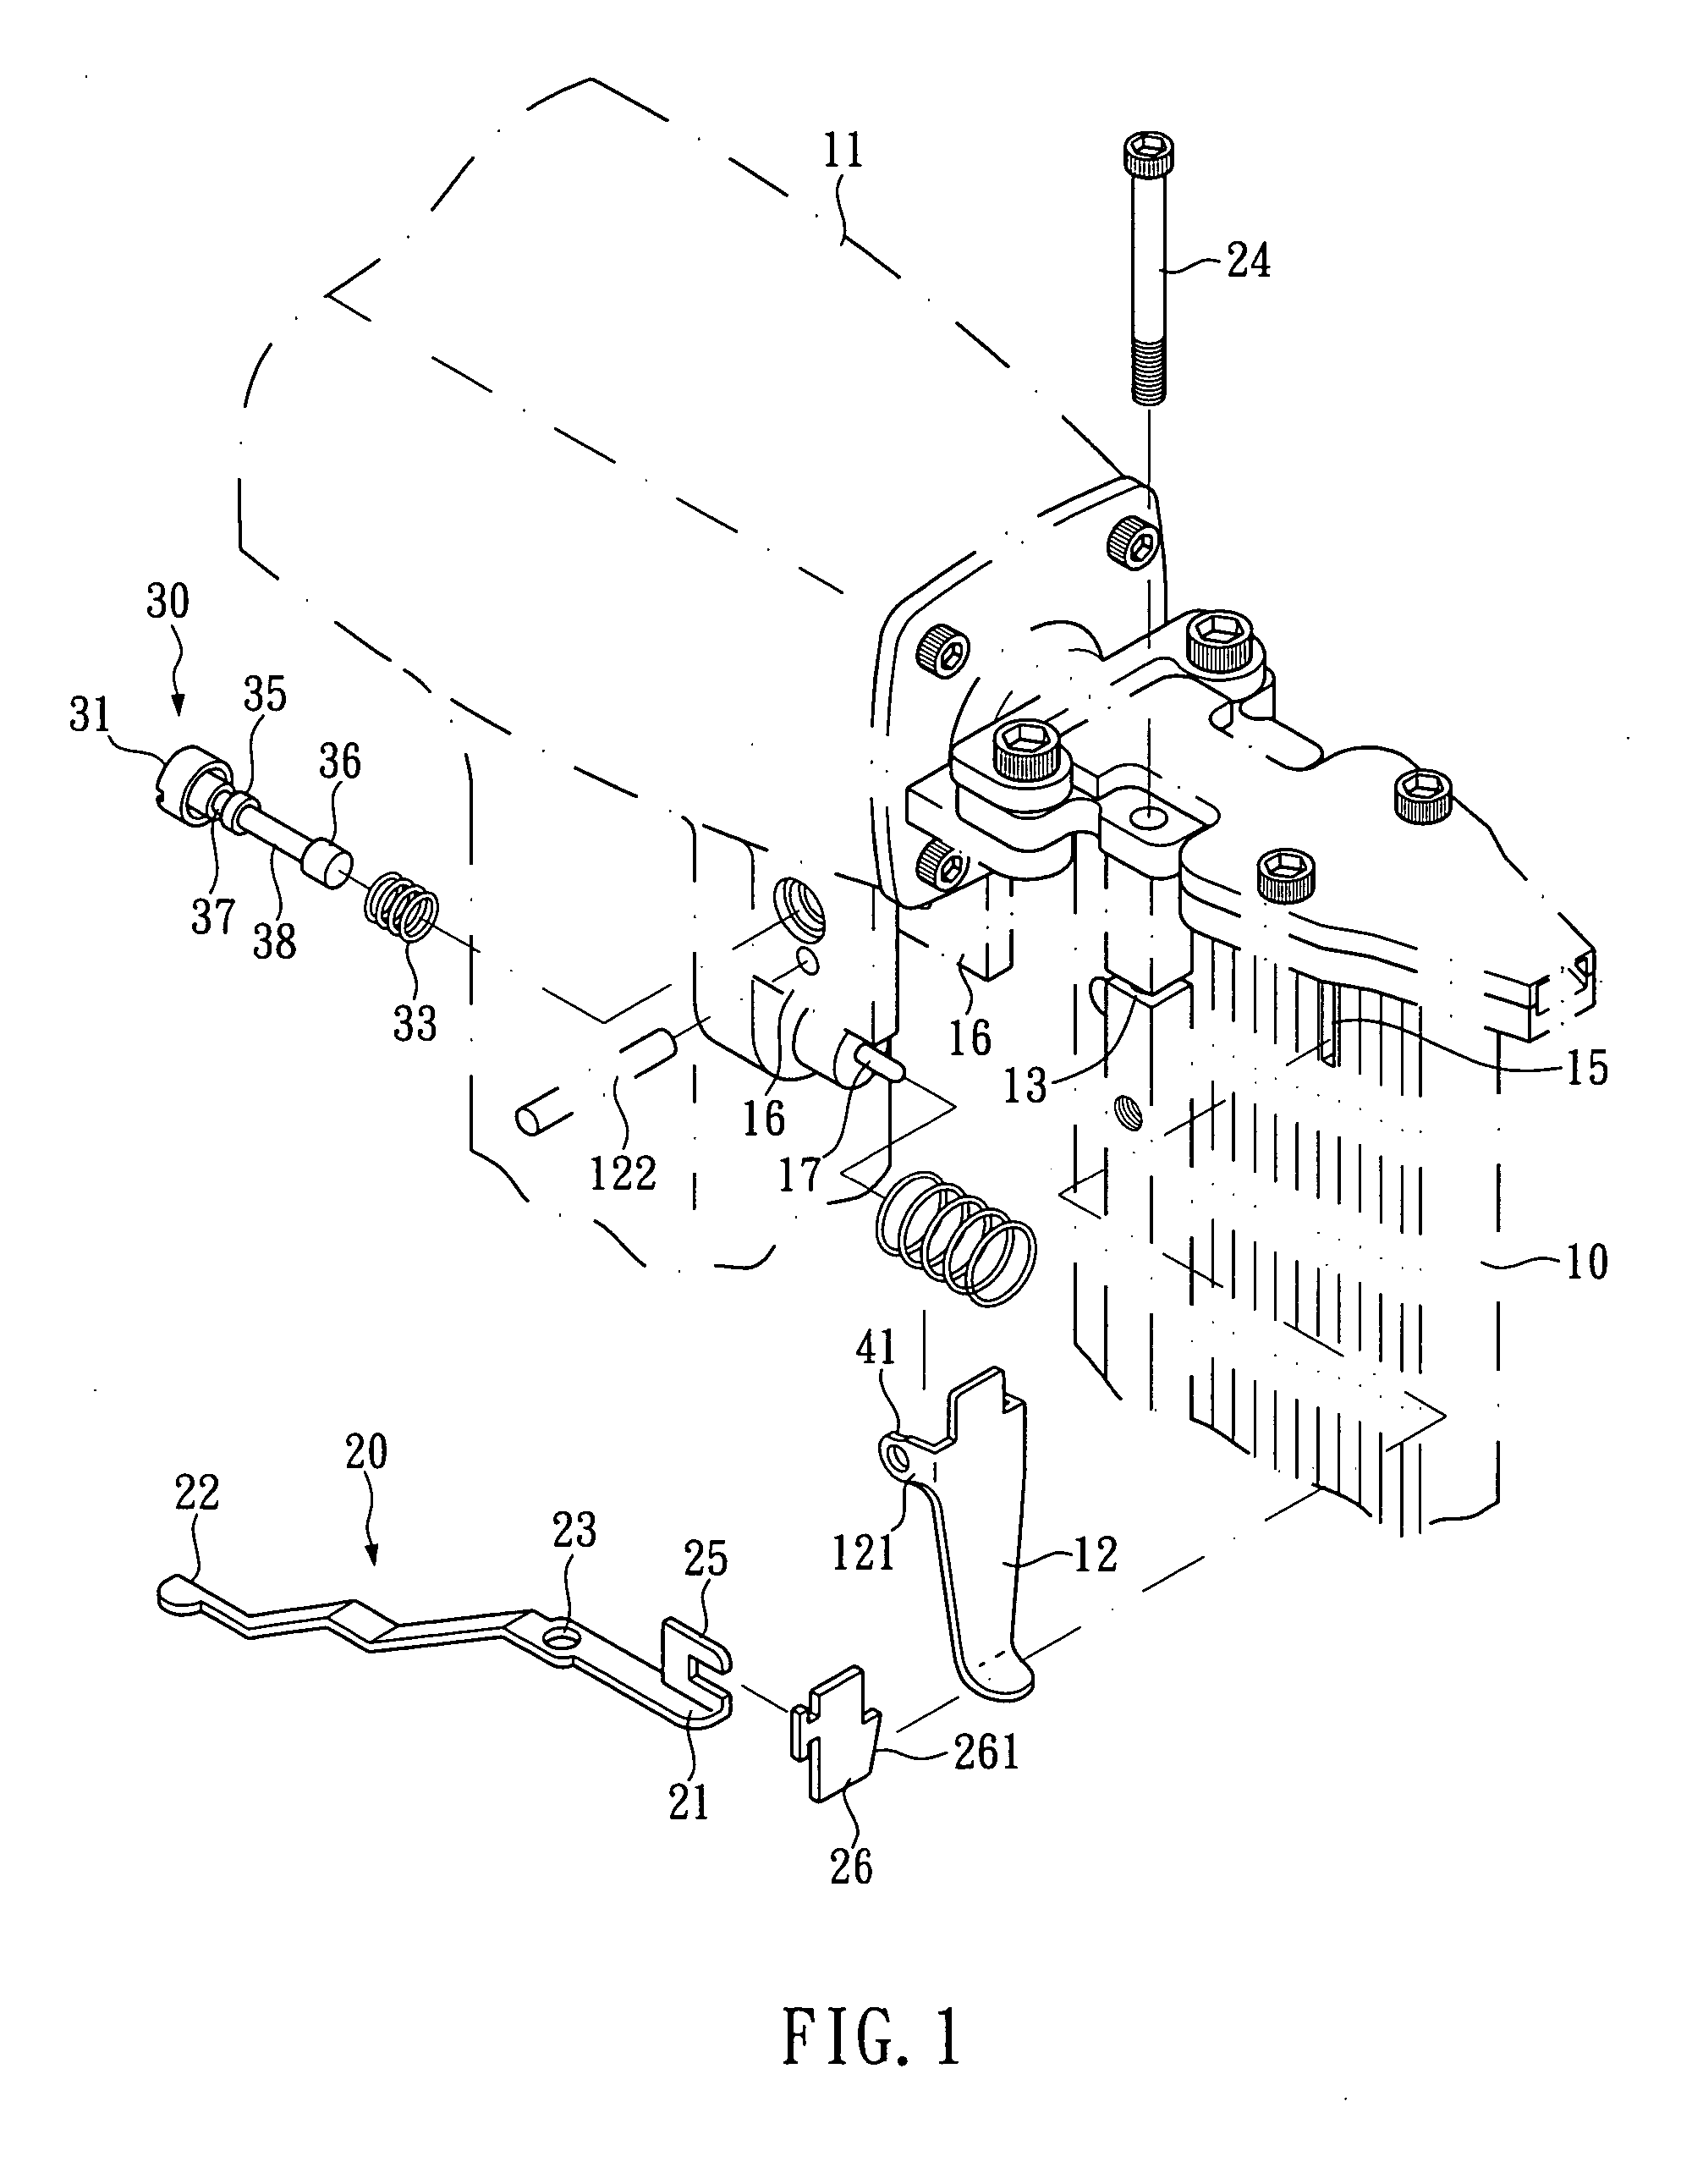 Structure of arresting mechanism for nail guns